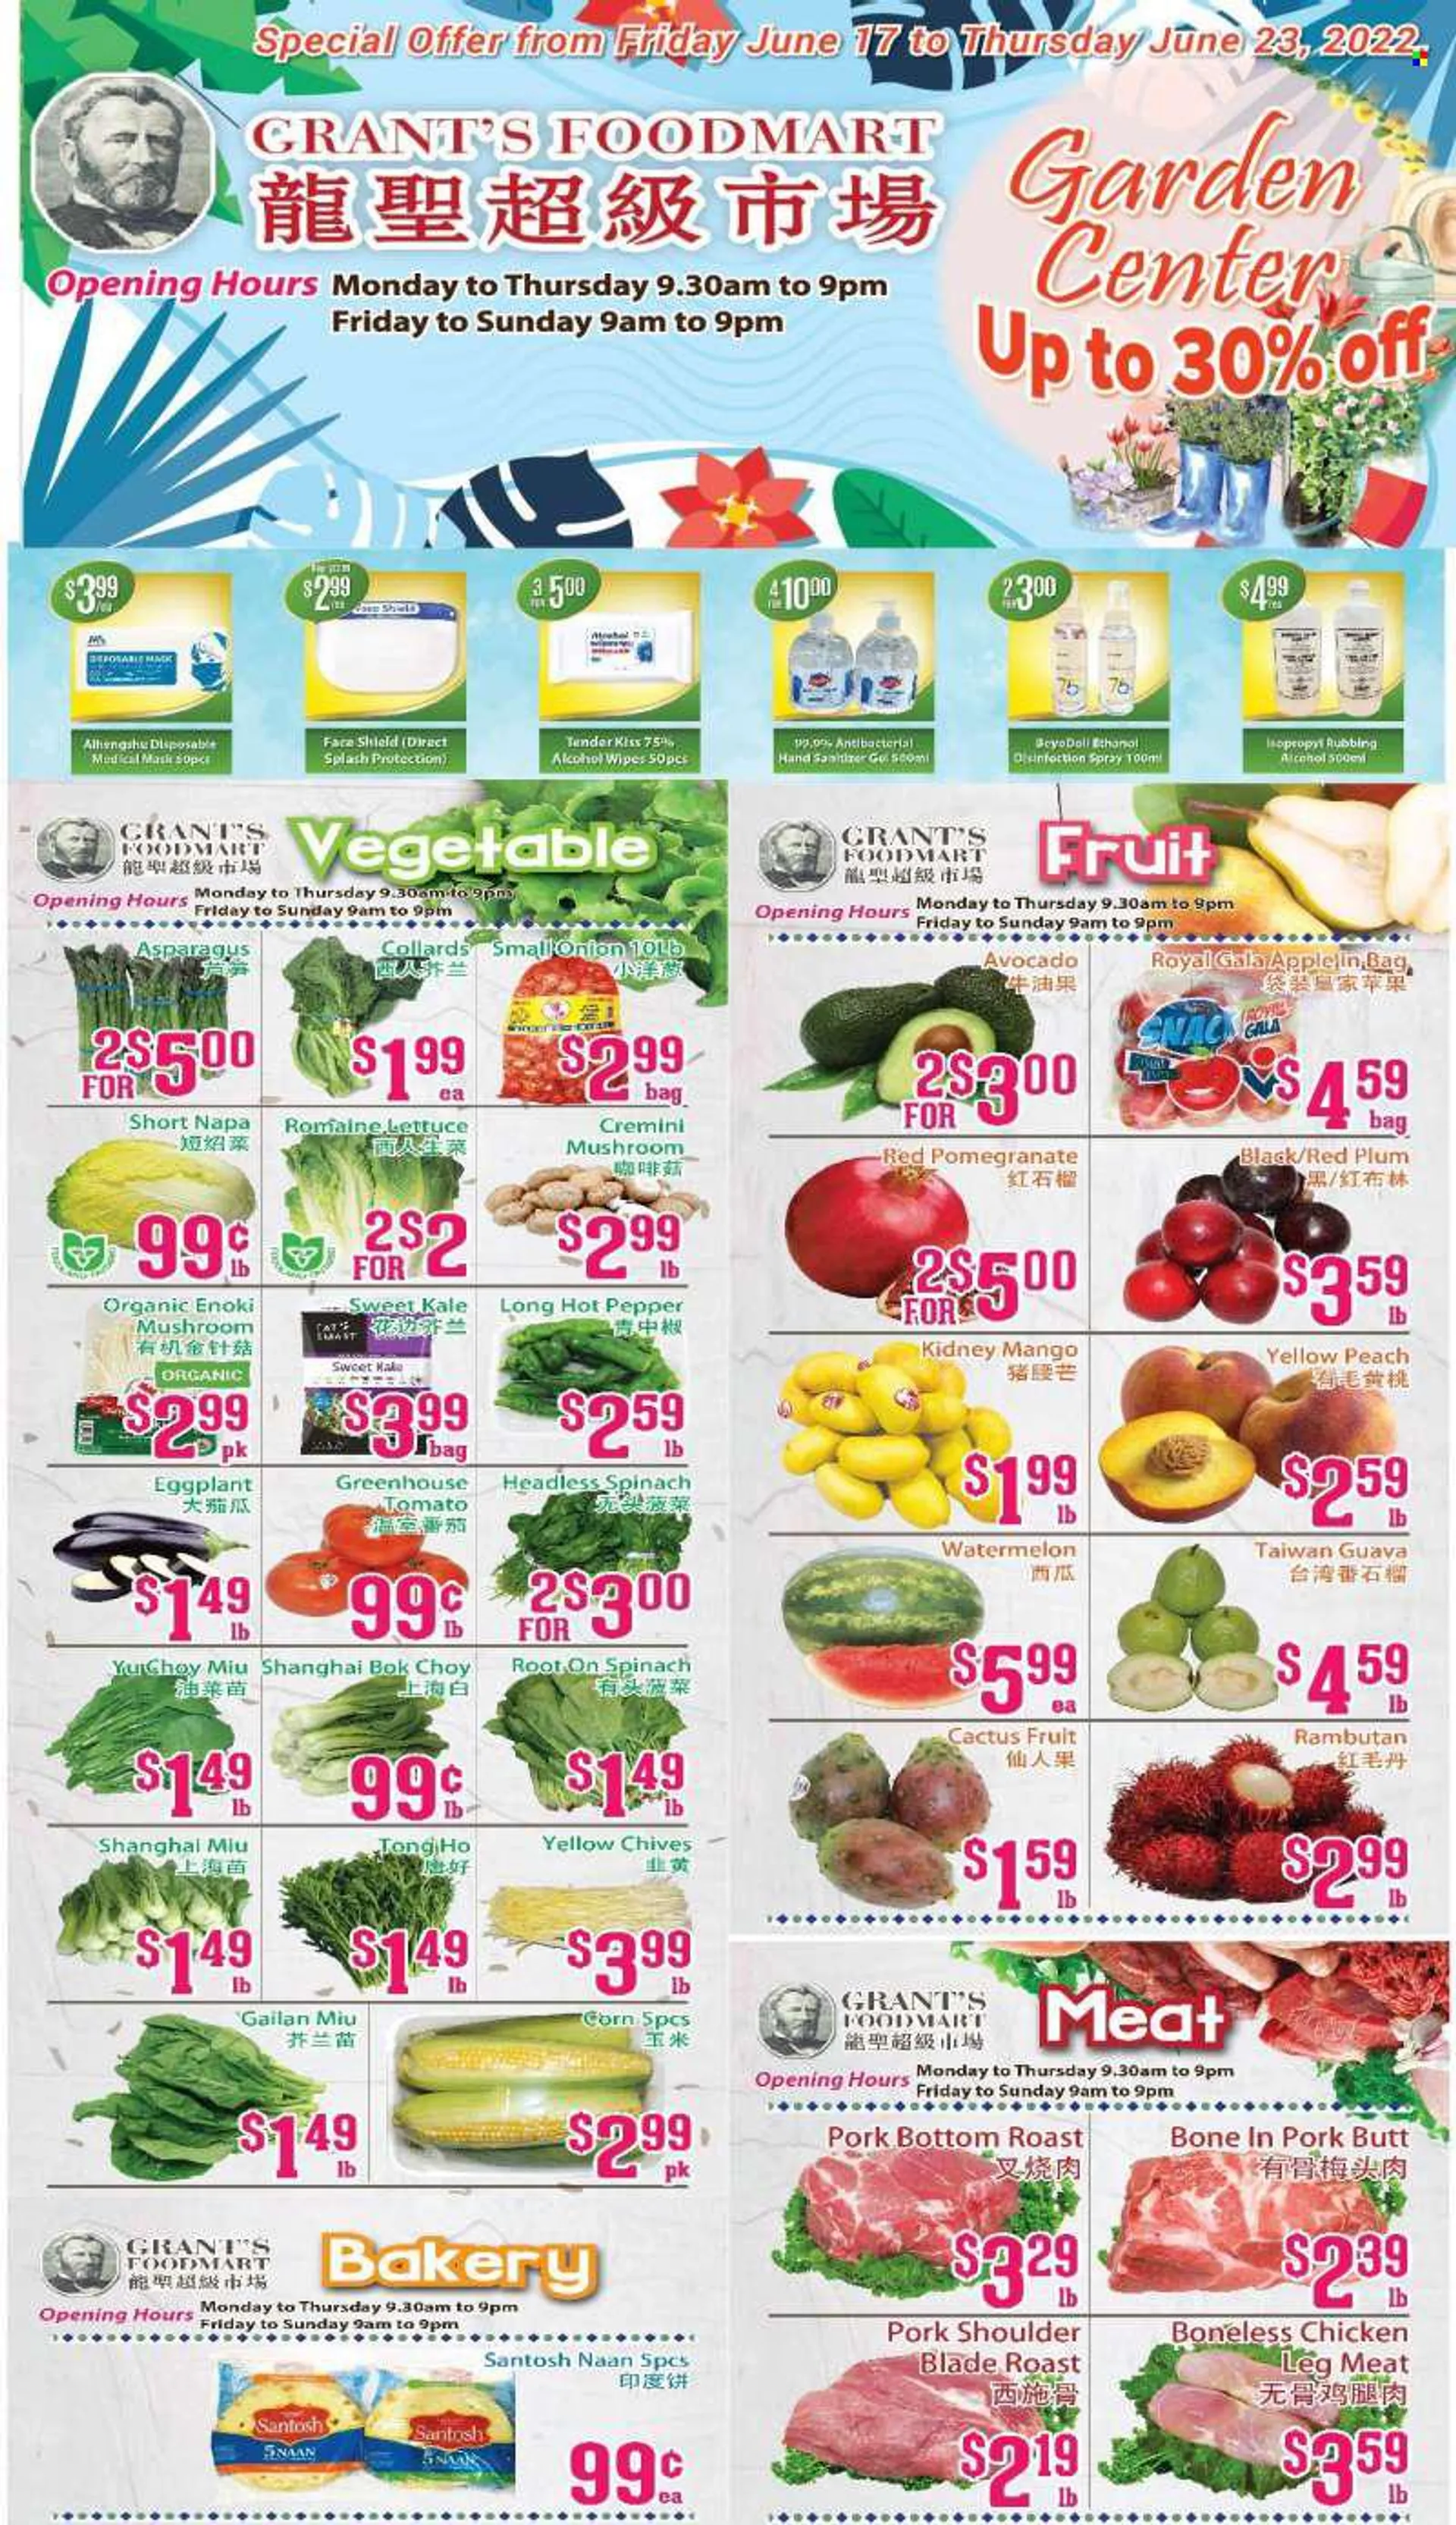 Grants Foodmart Flyer - June 17, 2022 - June 23, 2022 - Sales products - mushroom, asparagus, bok choy, corn, spinach, kale, onion, eggplant, chives, avocado, Gala apple, guava, watermelon, red plums, pomegranate, pepper, Grants, chicken legs, pork meat, 